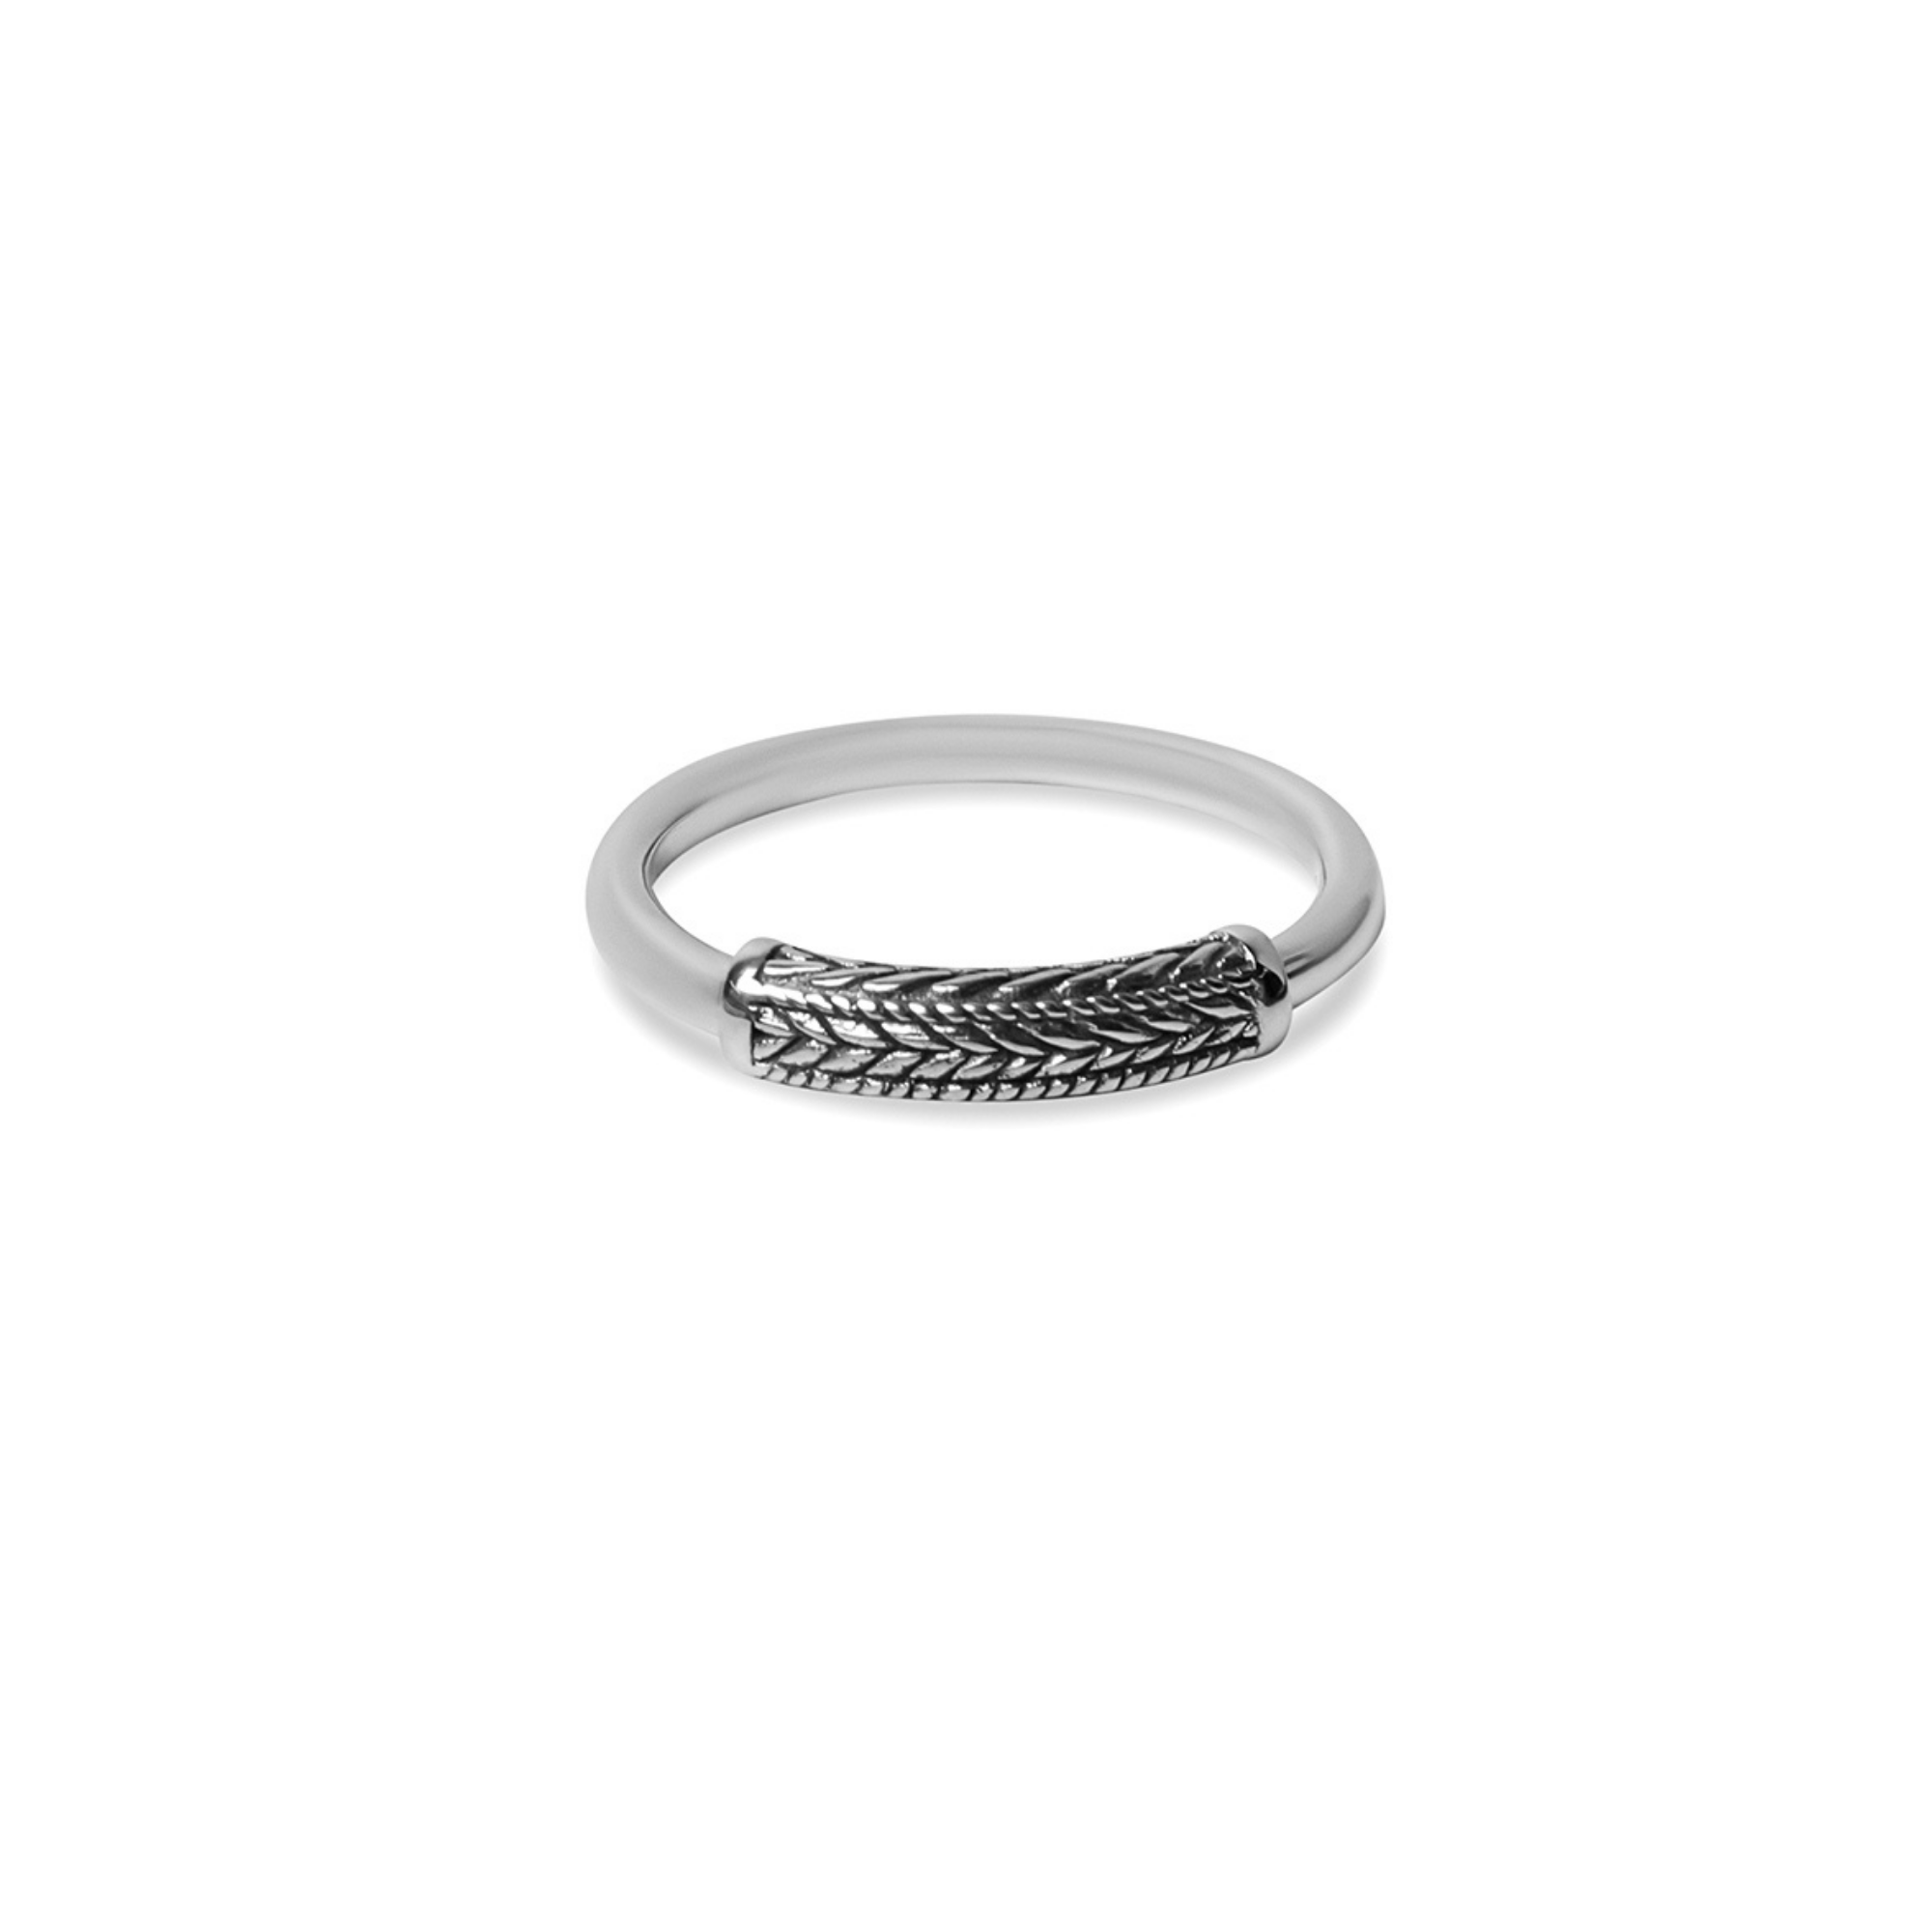 THE SILVER TRIBE RING